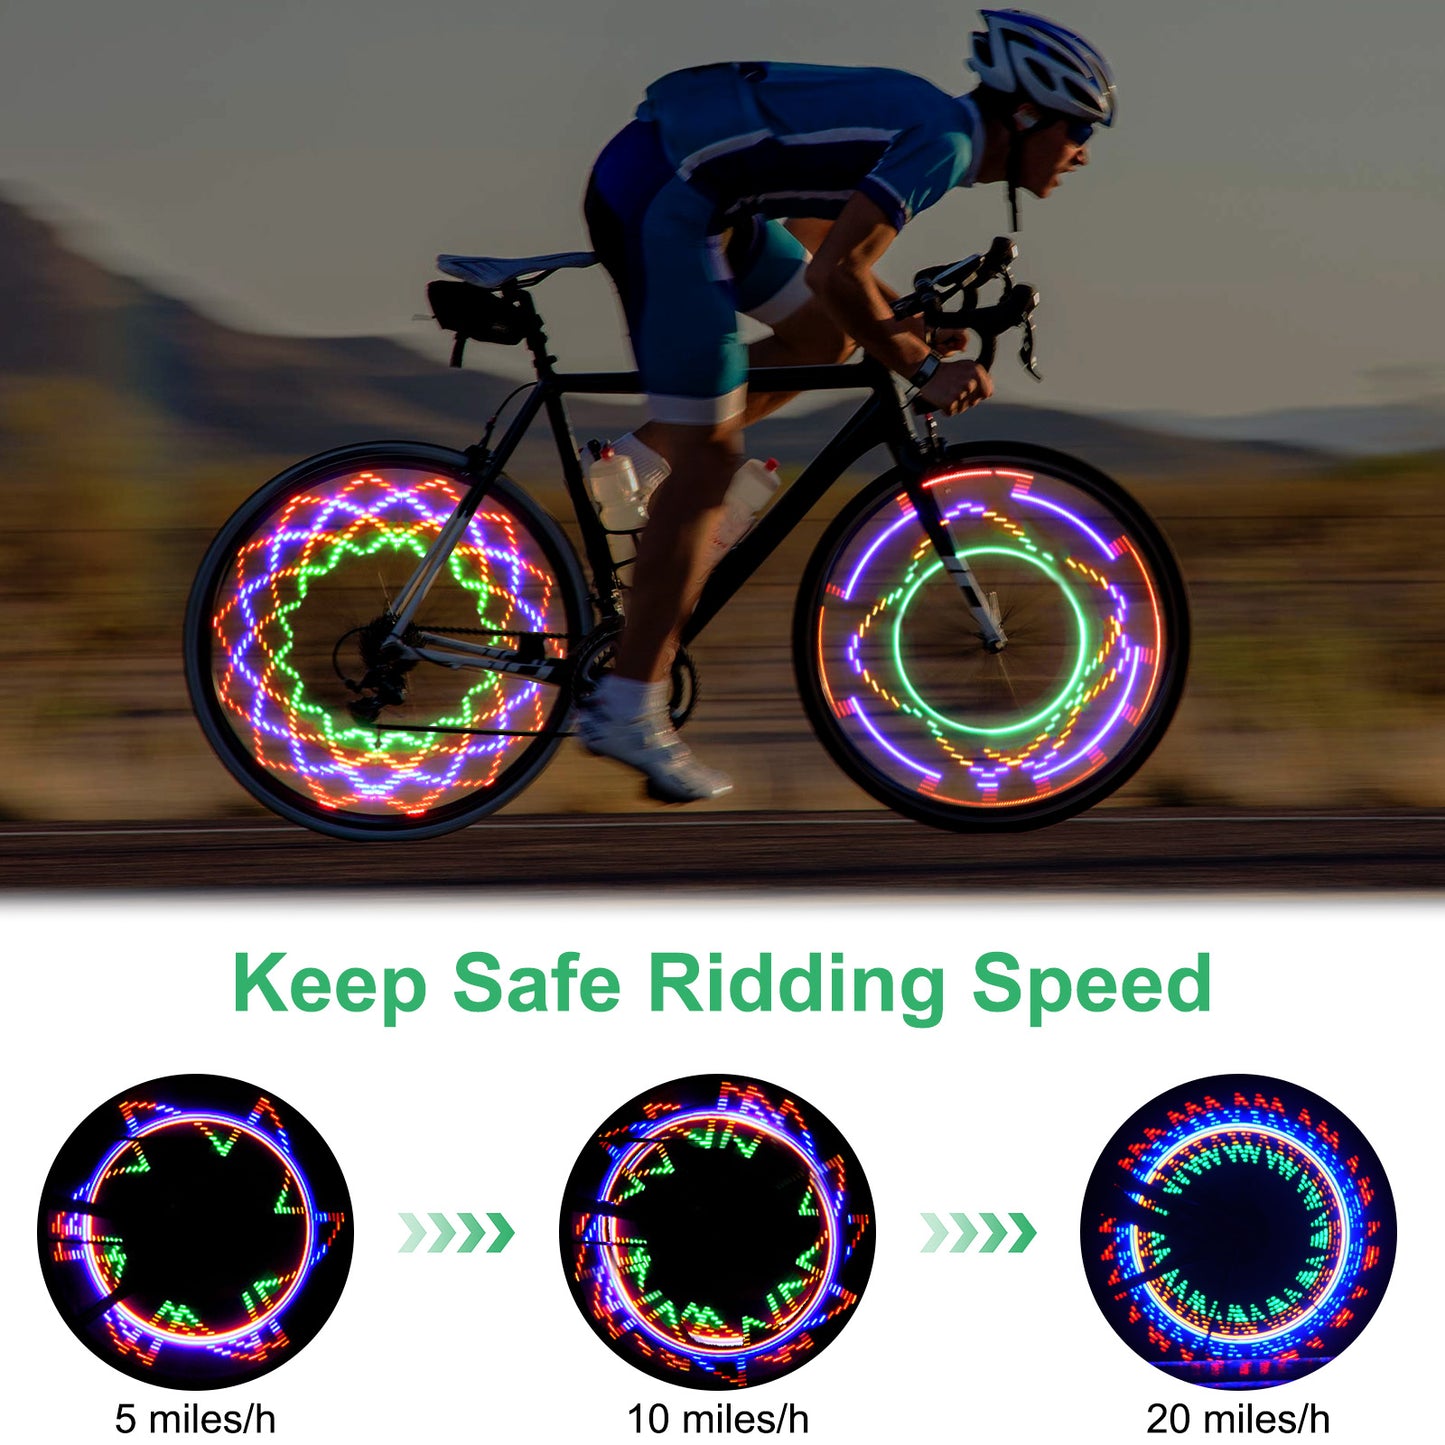 2pcs 32 LED Bike Wheel Lights - 32 Fun Bright Patterns, Waterproof, Easy Installation - Enhance Safety and Style for Night Riding